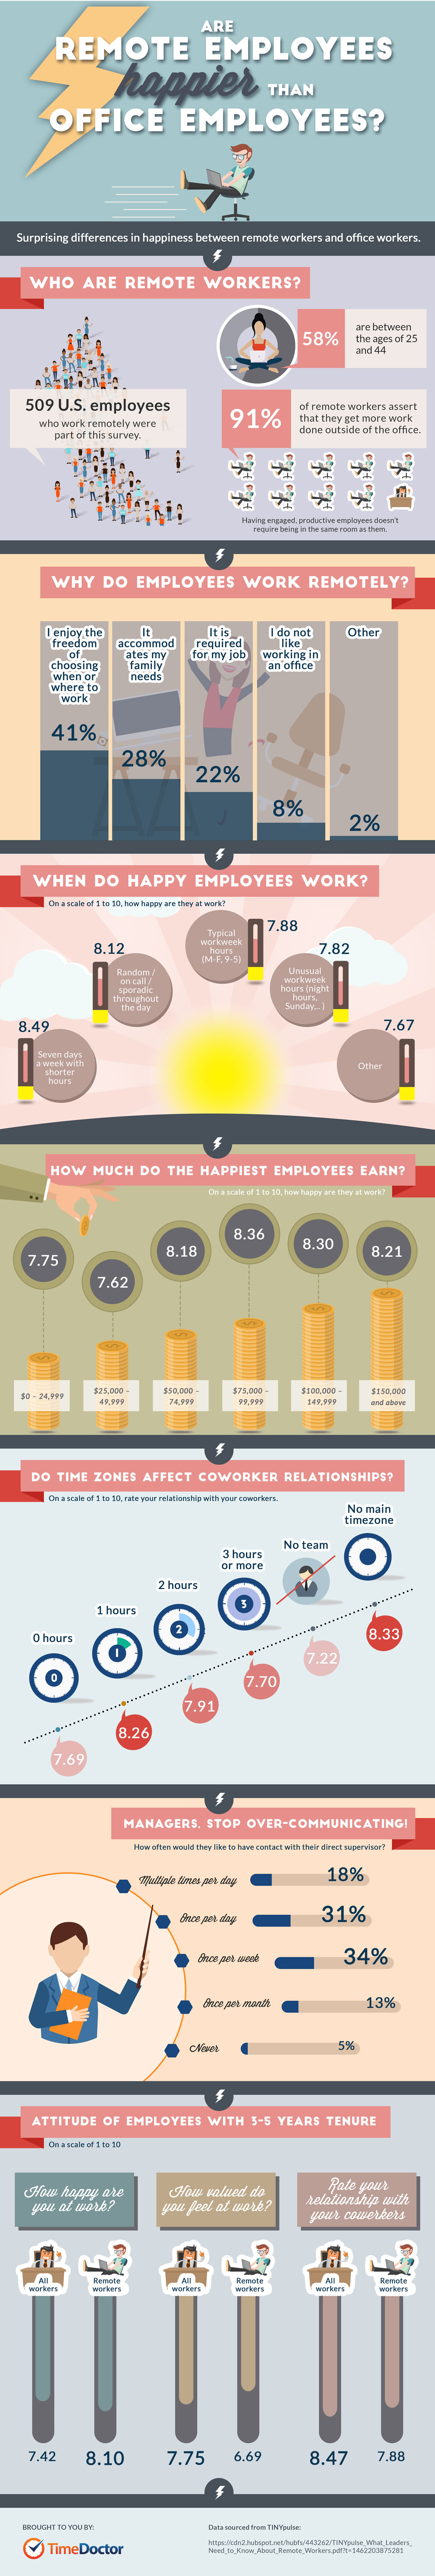 Are Remote Workers Happier Than Office Employees?